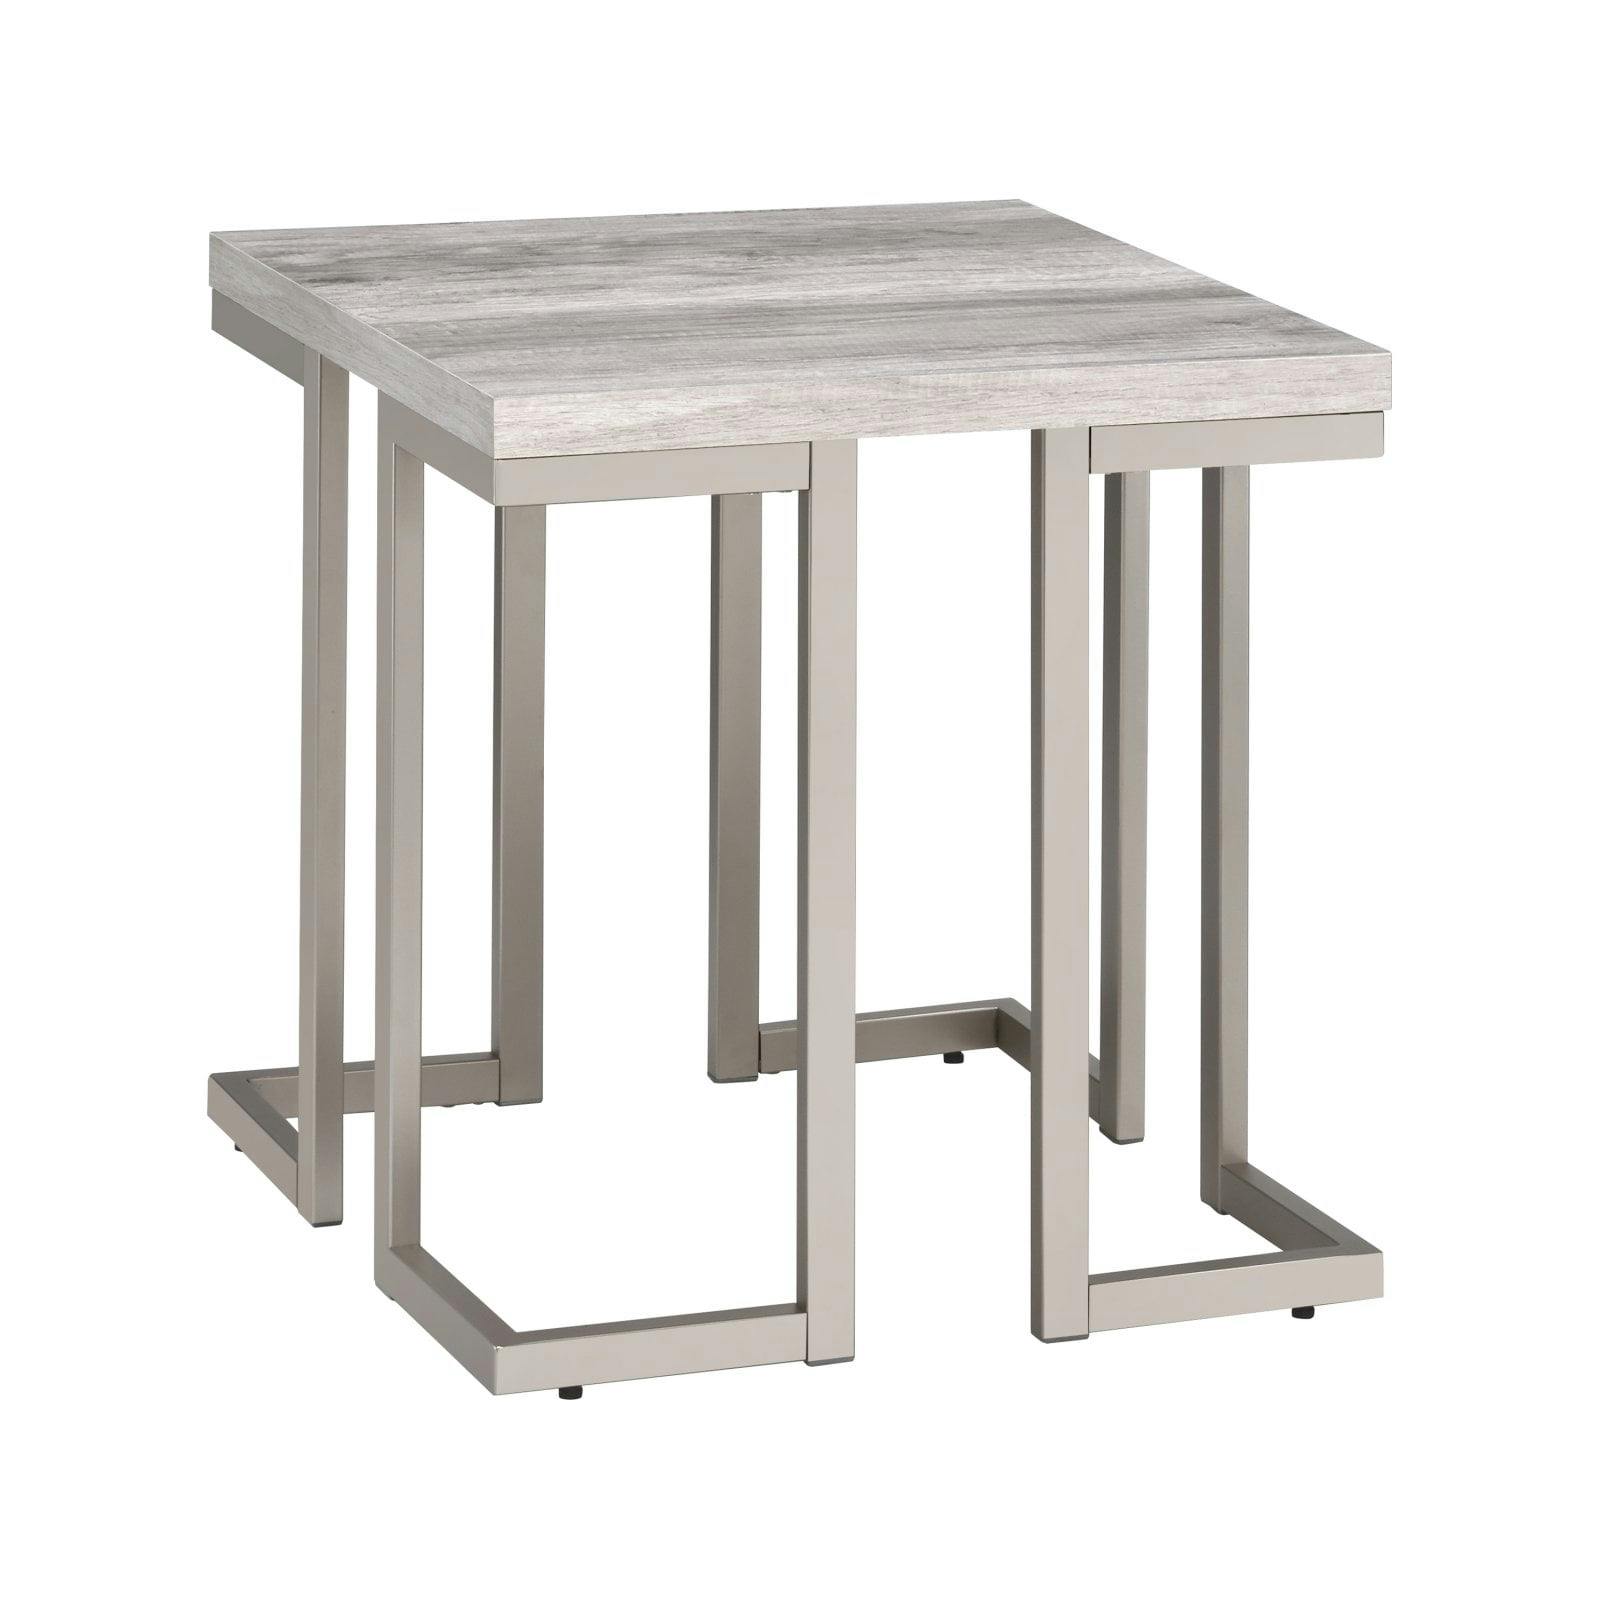 Contemporary Gray Driftwood Square End Table with Metal Base